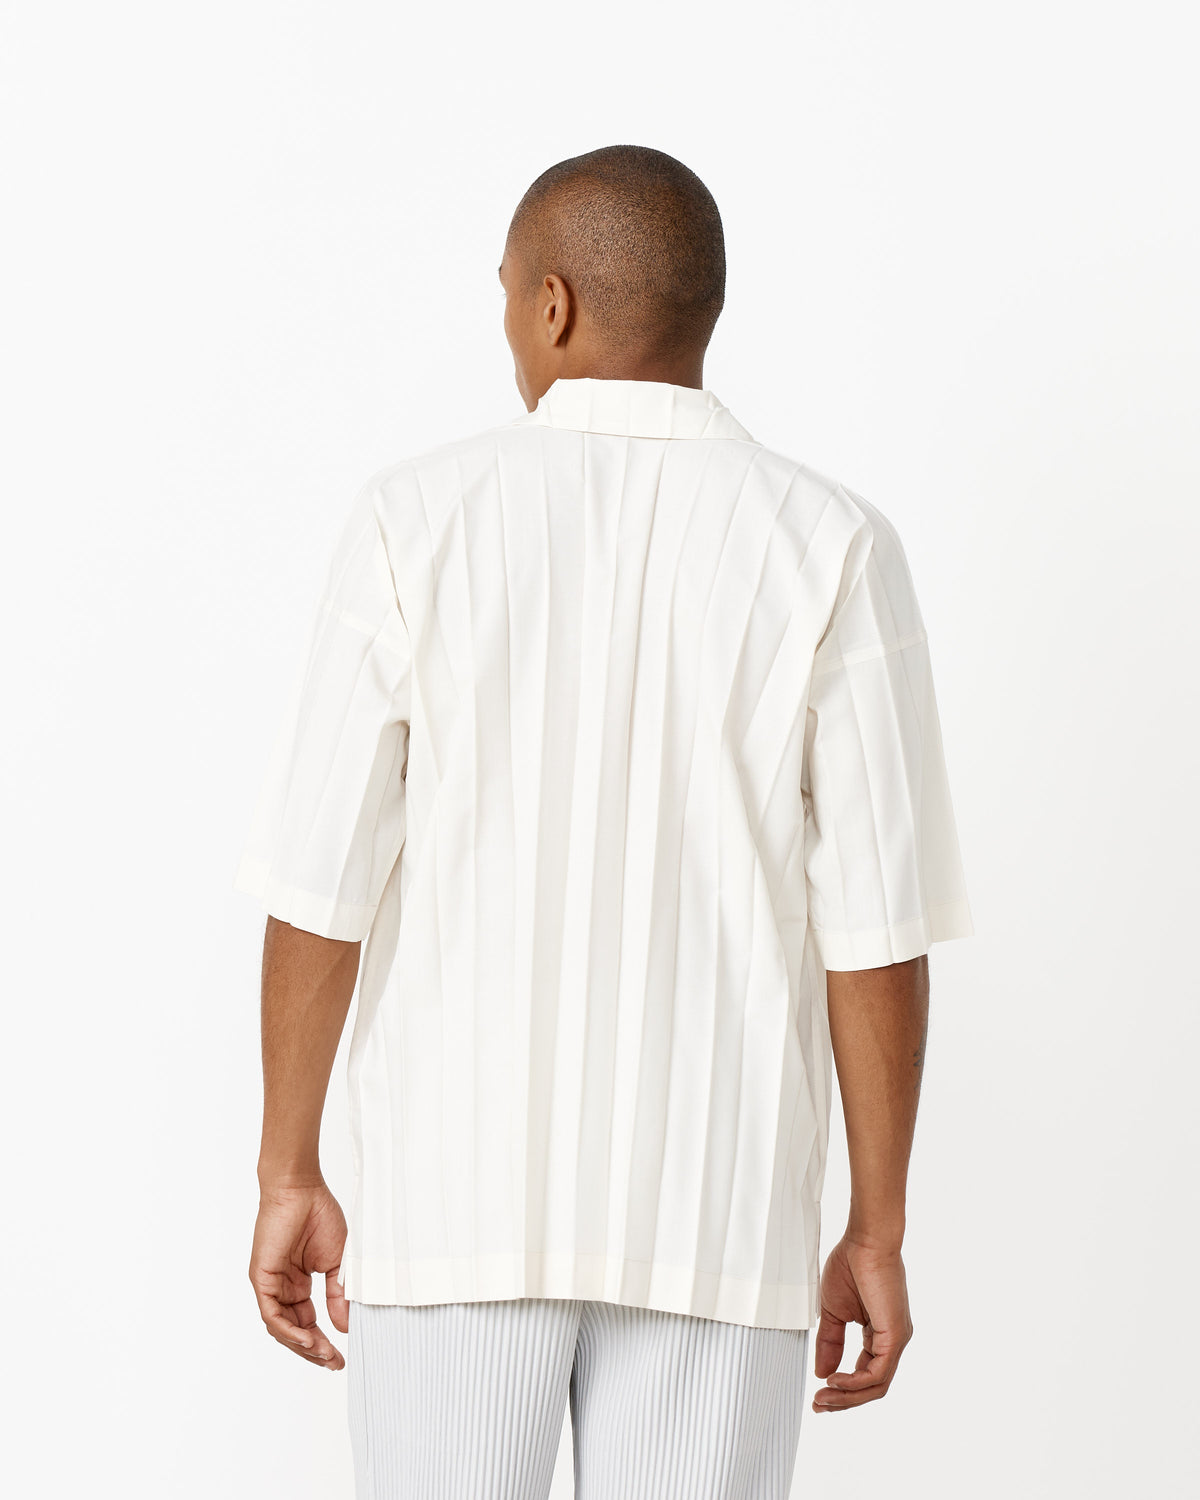 Shop Edge Shirt Homme Plissé Issey Miyake and save big! Find the